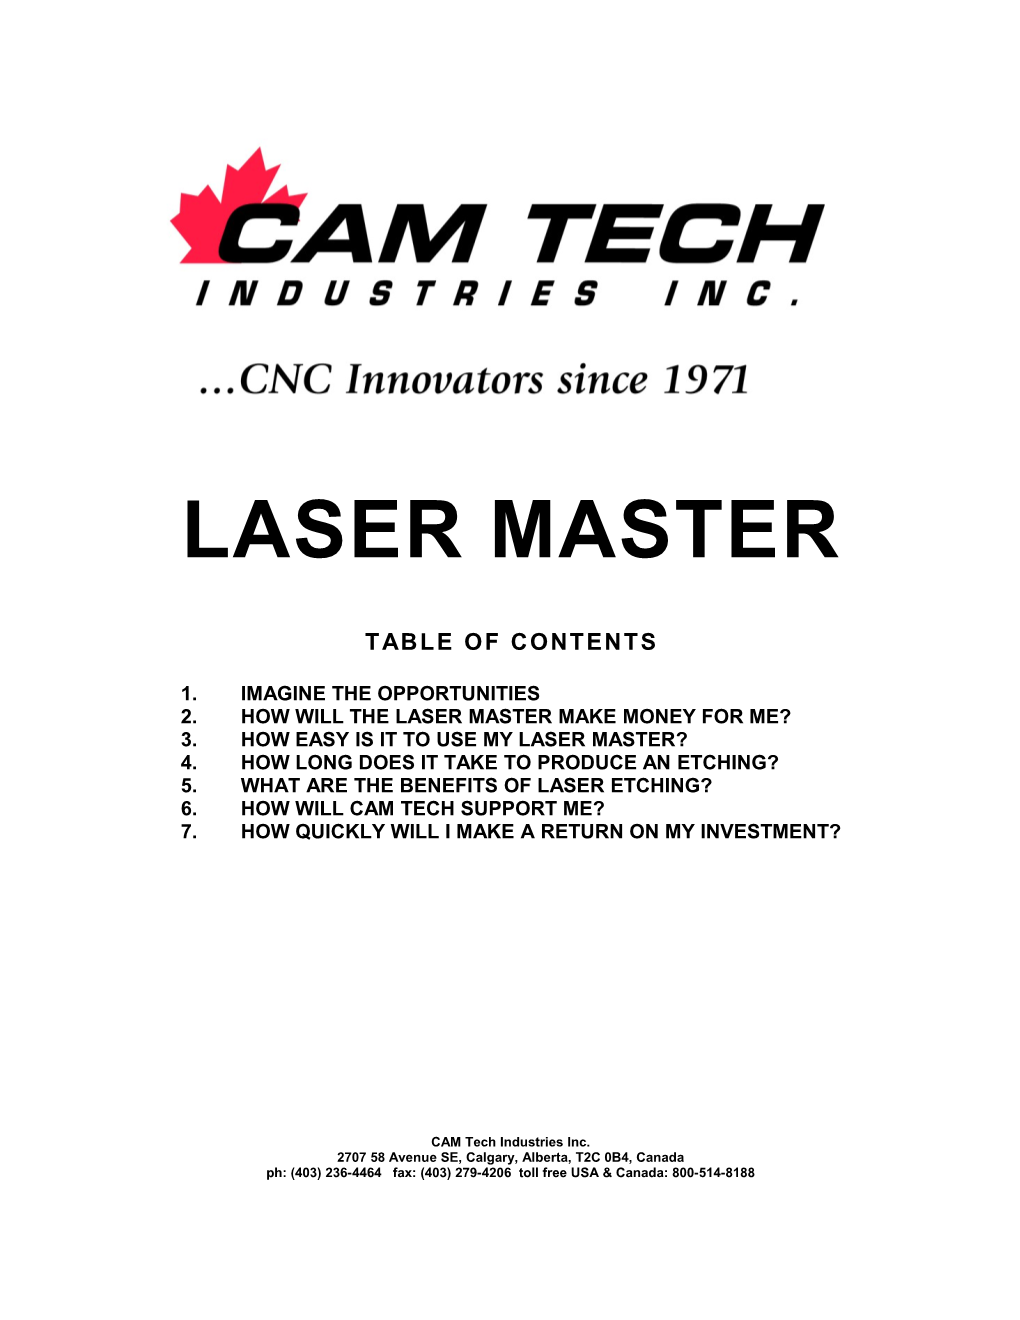 CAM Tech Introduces the LASER MASTER